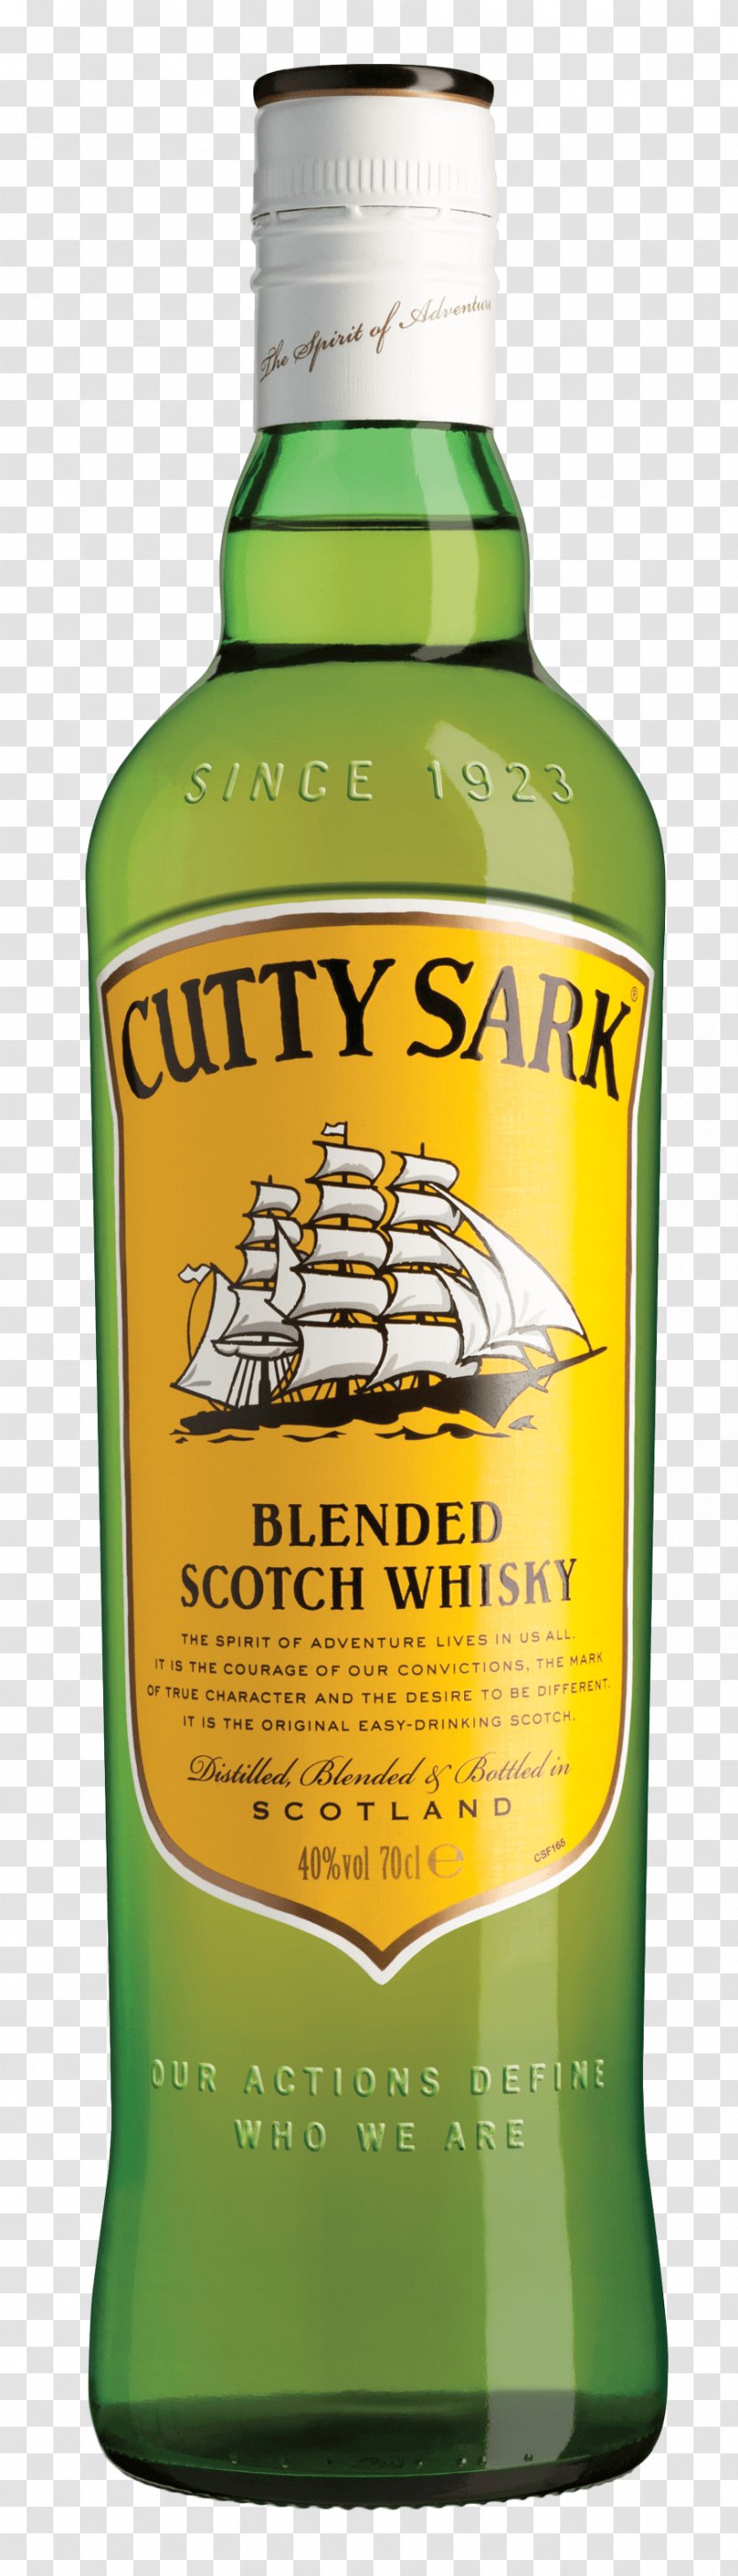 Cutty Sark Scotch Whisky Blended Whiskey Single Malt - Famous Grouse Transparent PNG